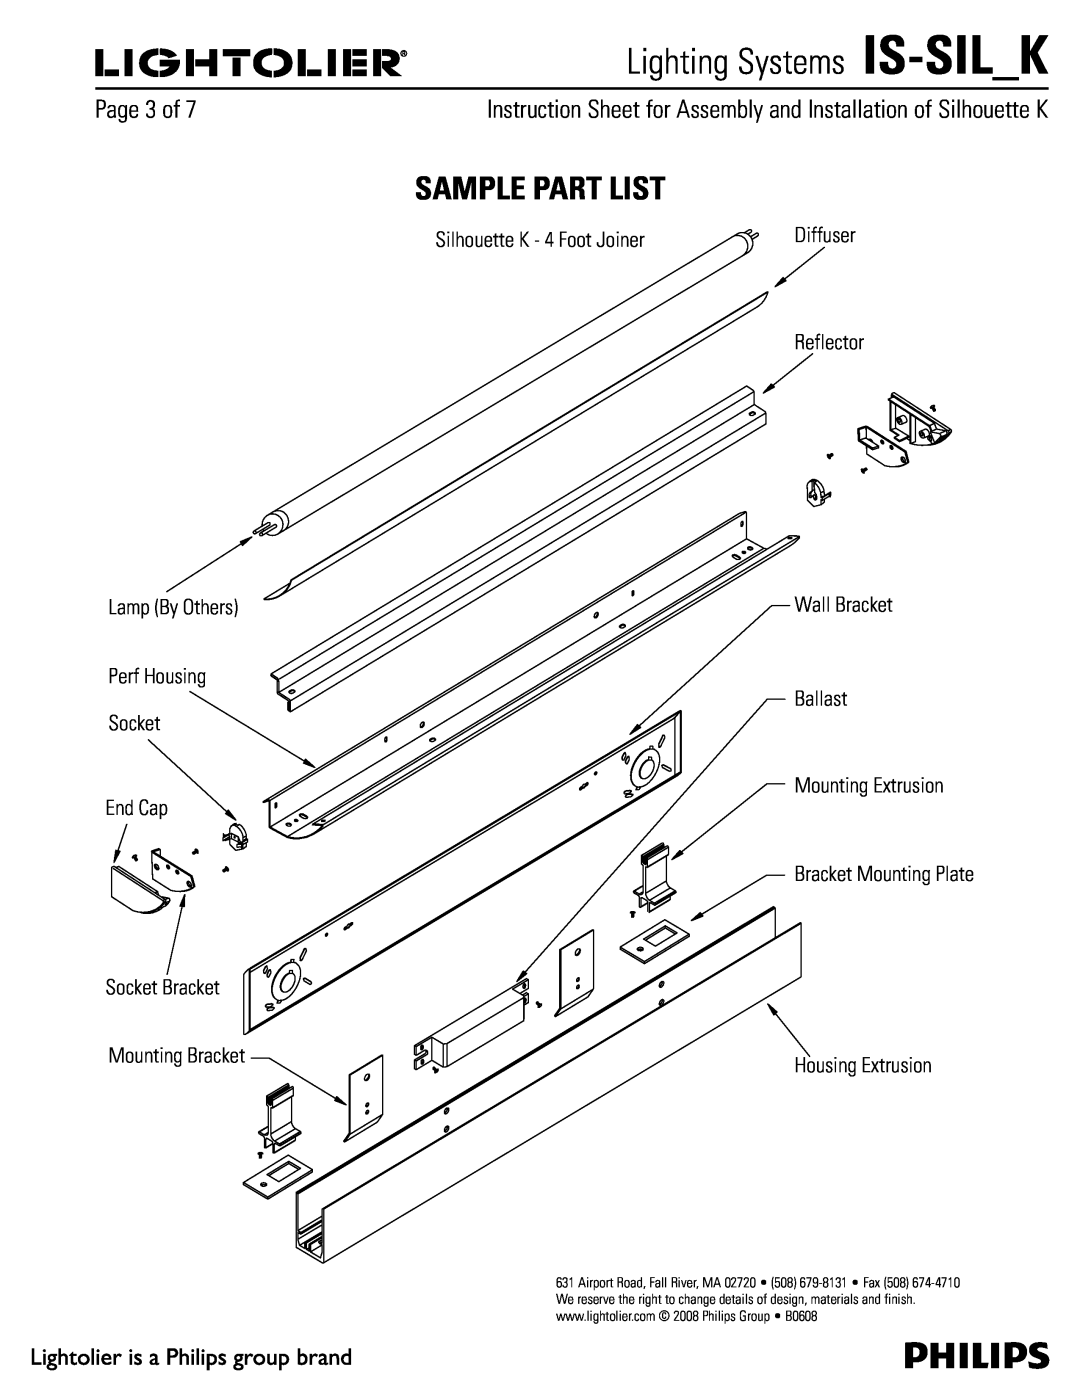 Lightolier IS-SIL_K Sample Part List, 1BHFPG, Lamp By Others Perf Housing Socket End Cap, Lighting Systems IS-SIL K 